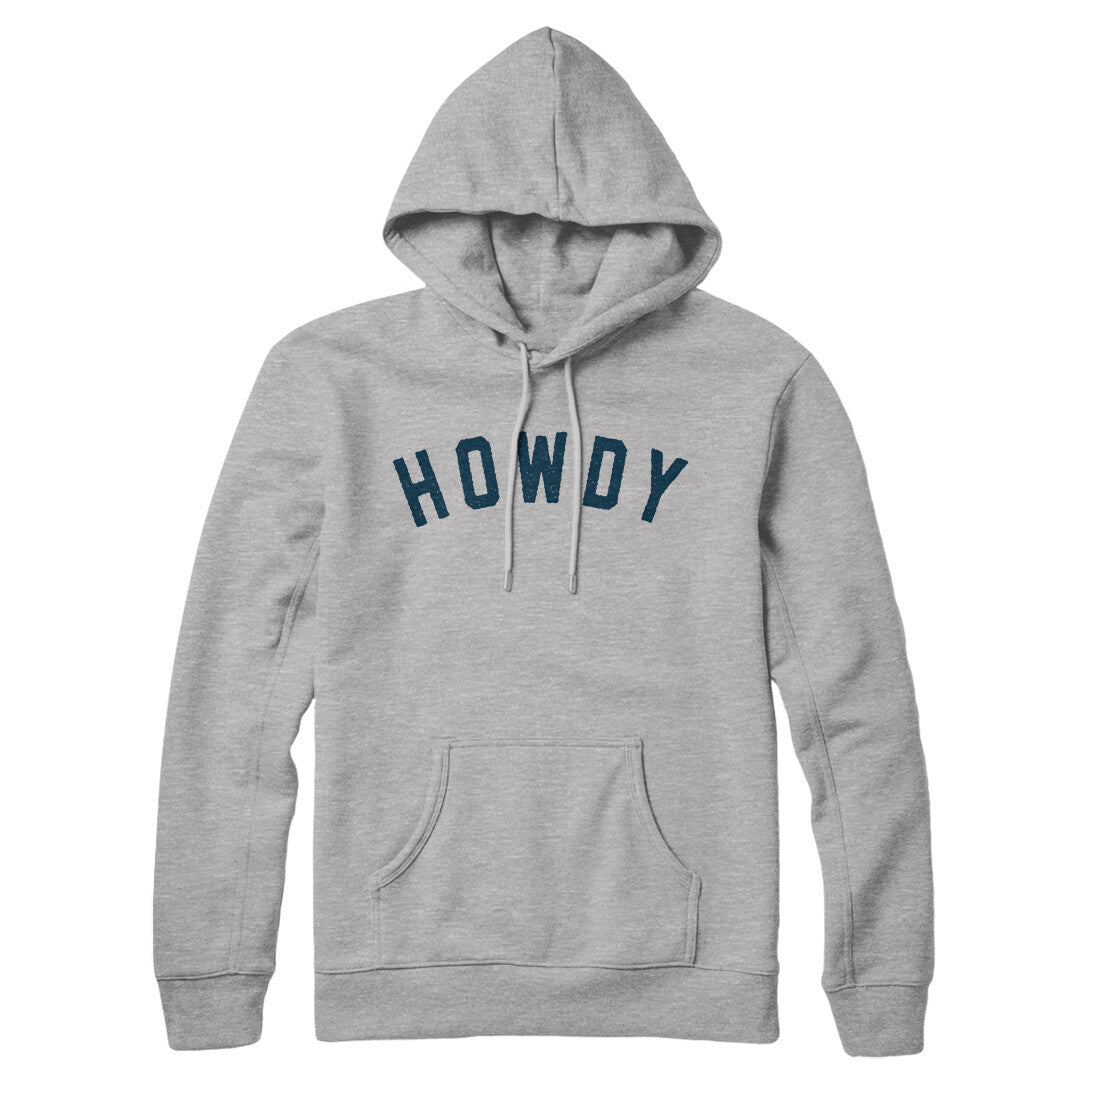 Howdy in Heather Grey Color